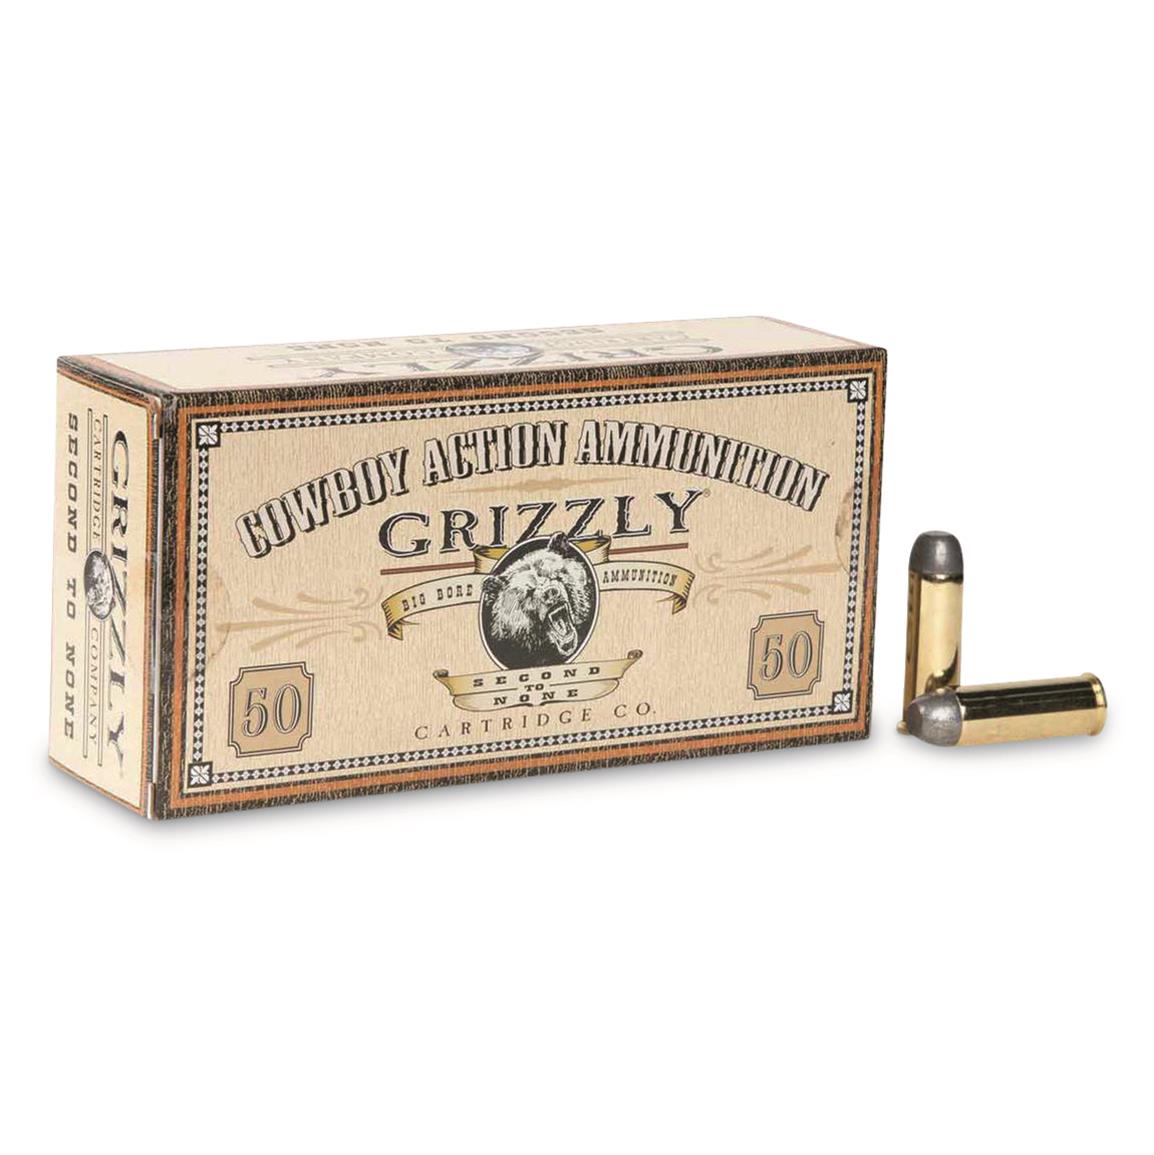 Grizzly Cartridge Co. Cowboy Action Ammo, .45 Colt, RNFP, 250 Grain, 50 Rounds